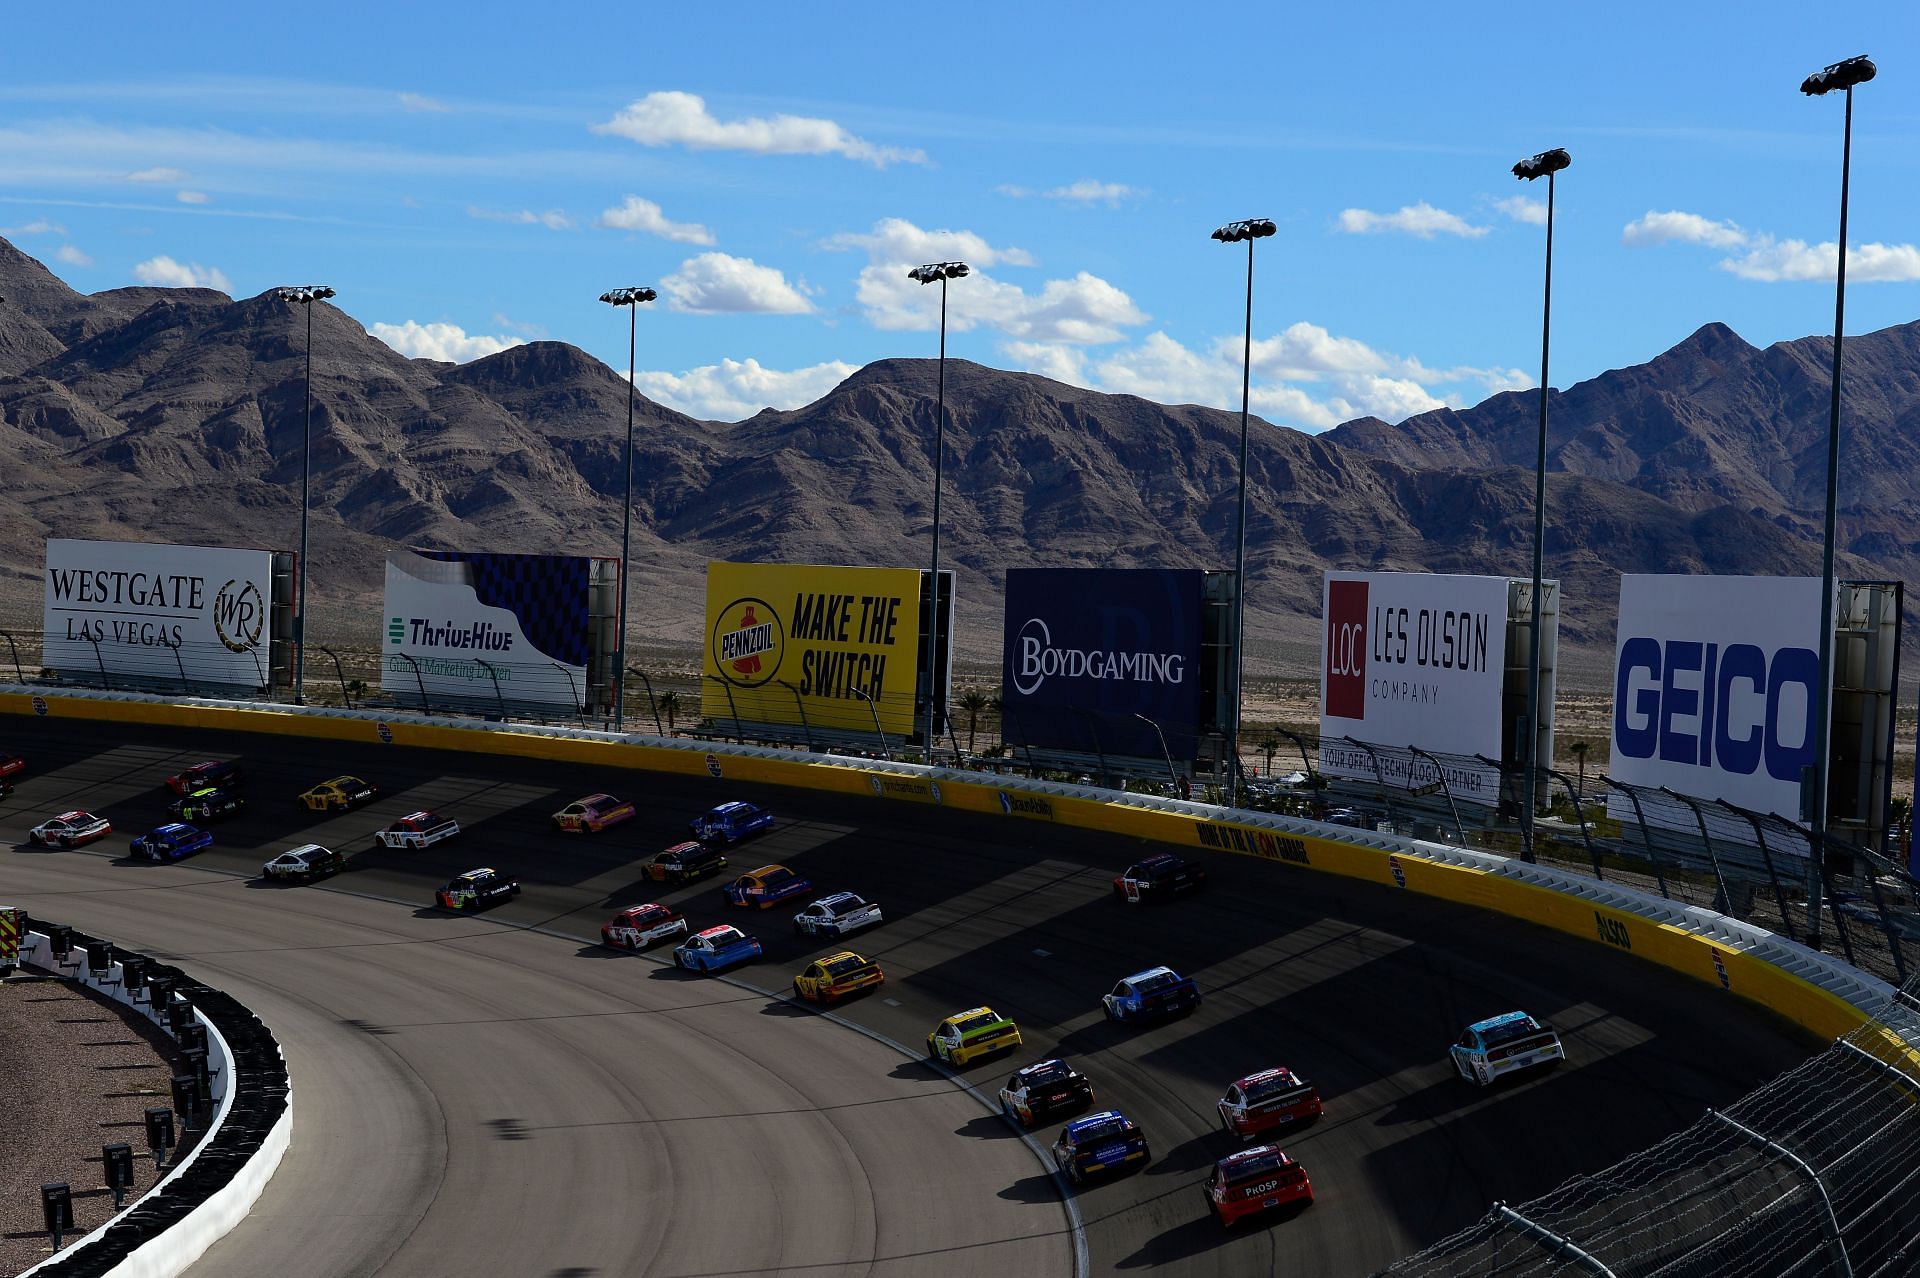 Cars race on the backstretch during the 2019 NASCAR Cup Series Pennzoil Oil 400 at Las Vegas Motor Speedway (Photo by Robert Laberge/Getty Images)